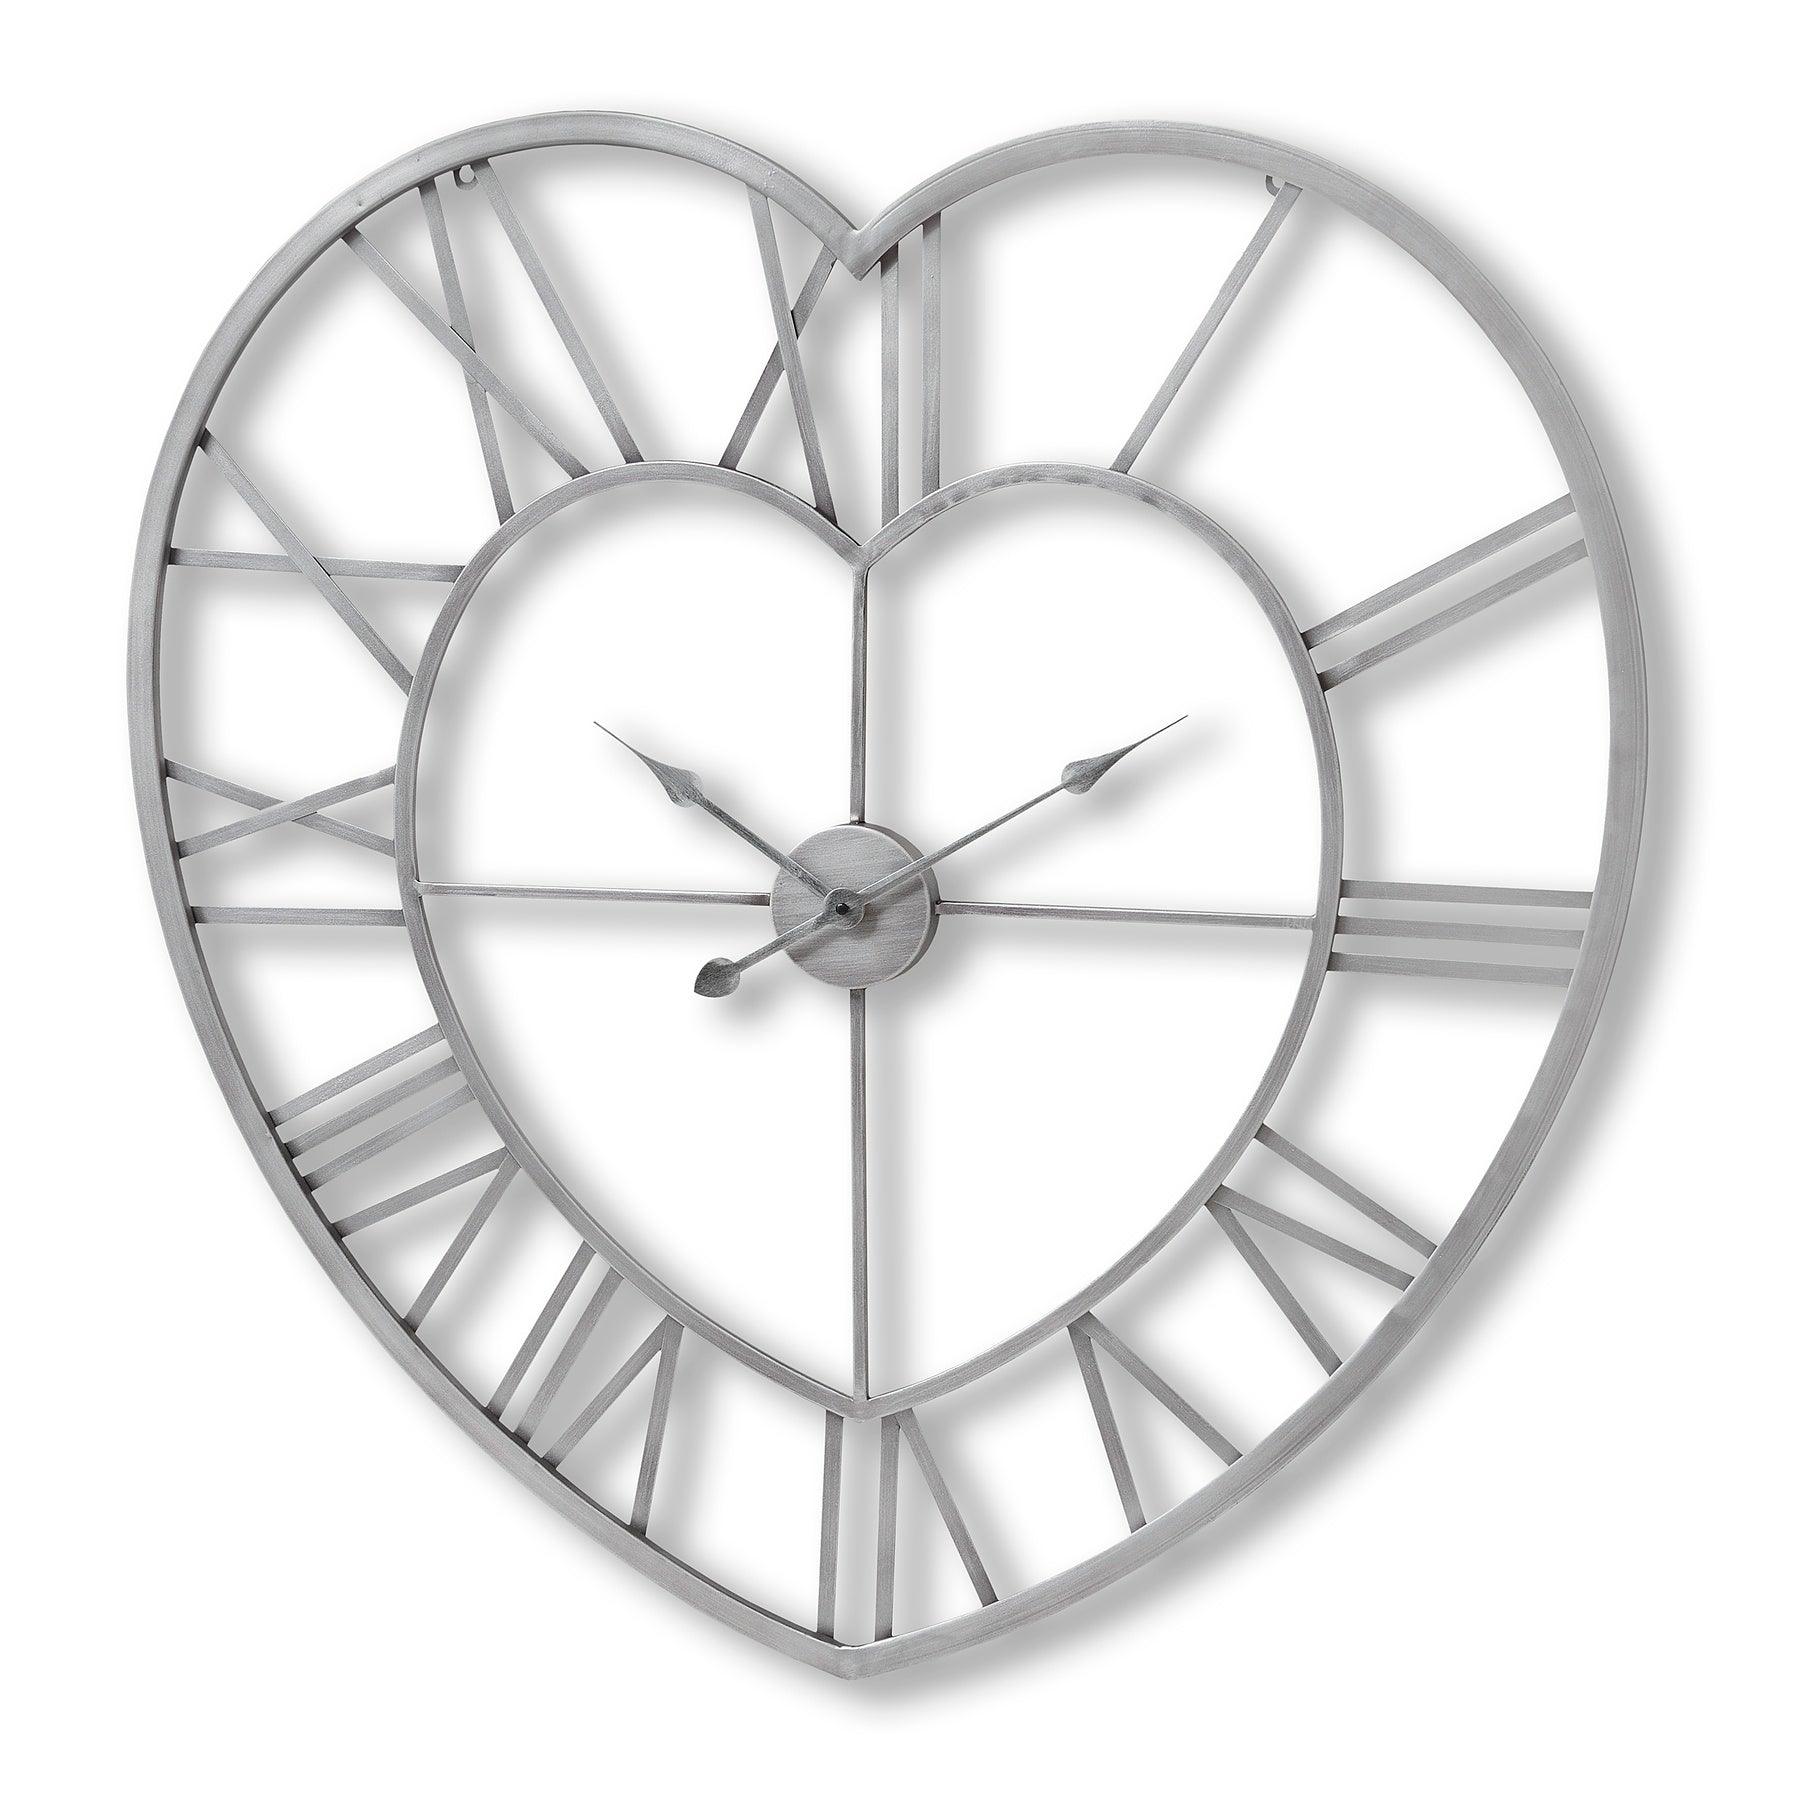 View Silver Heart Skeleton Wall Clock information